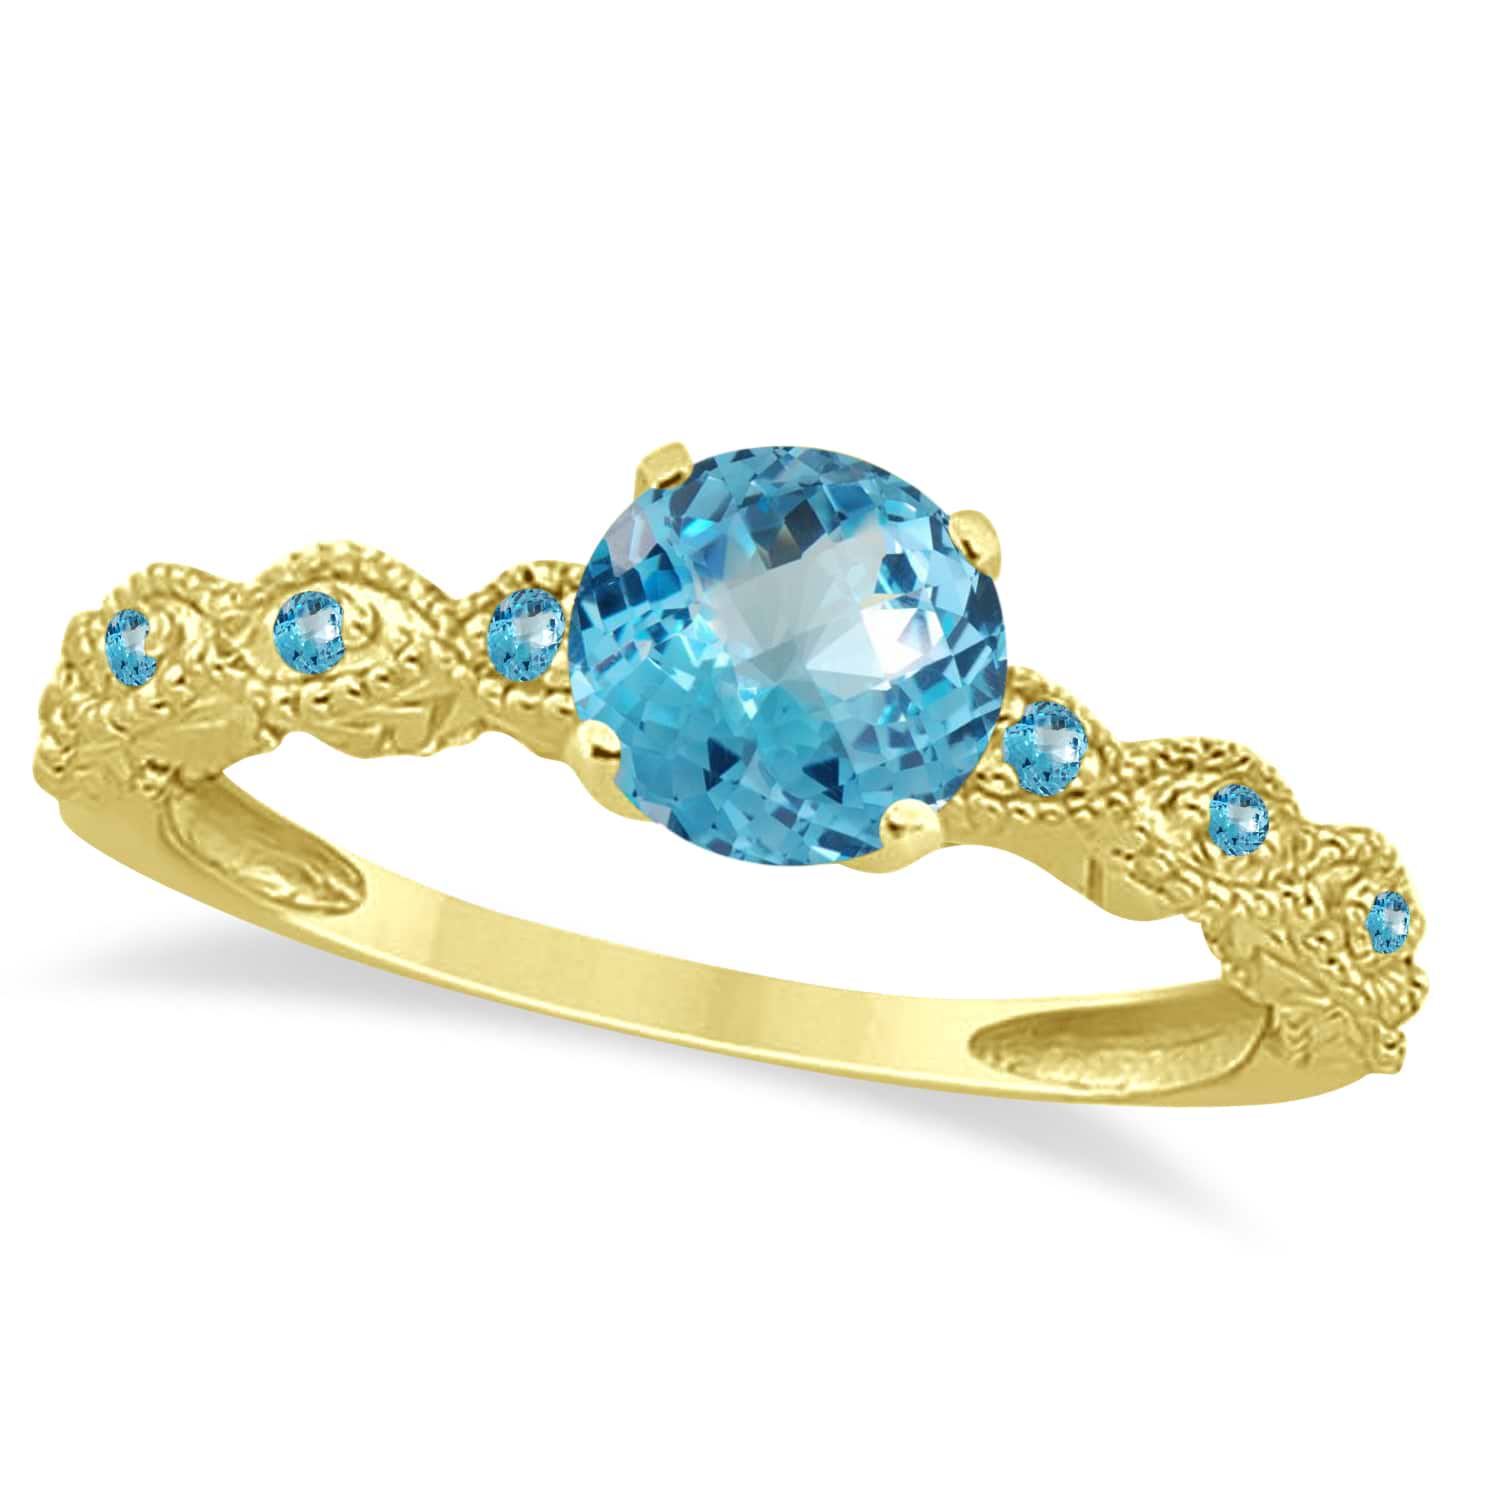 Vintage Style Blue Topaz Engagement Ring 18k Yellow Gold (1.18ct)